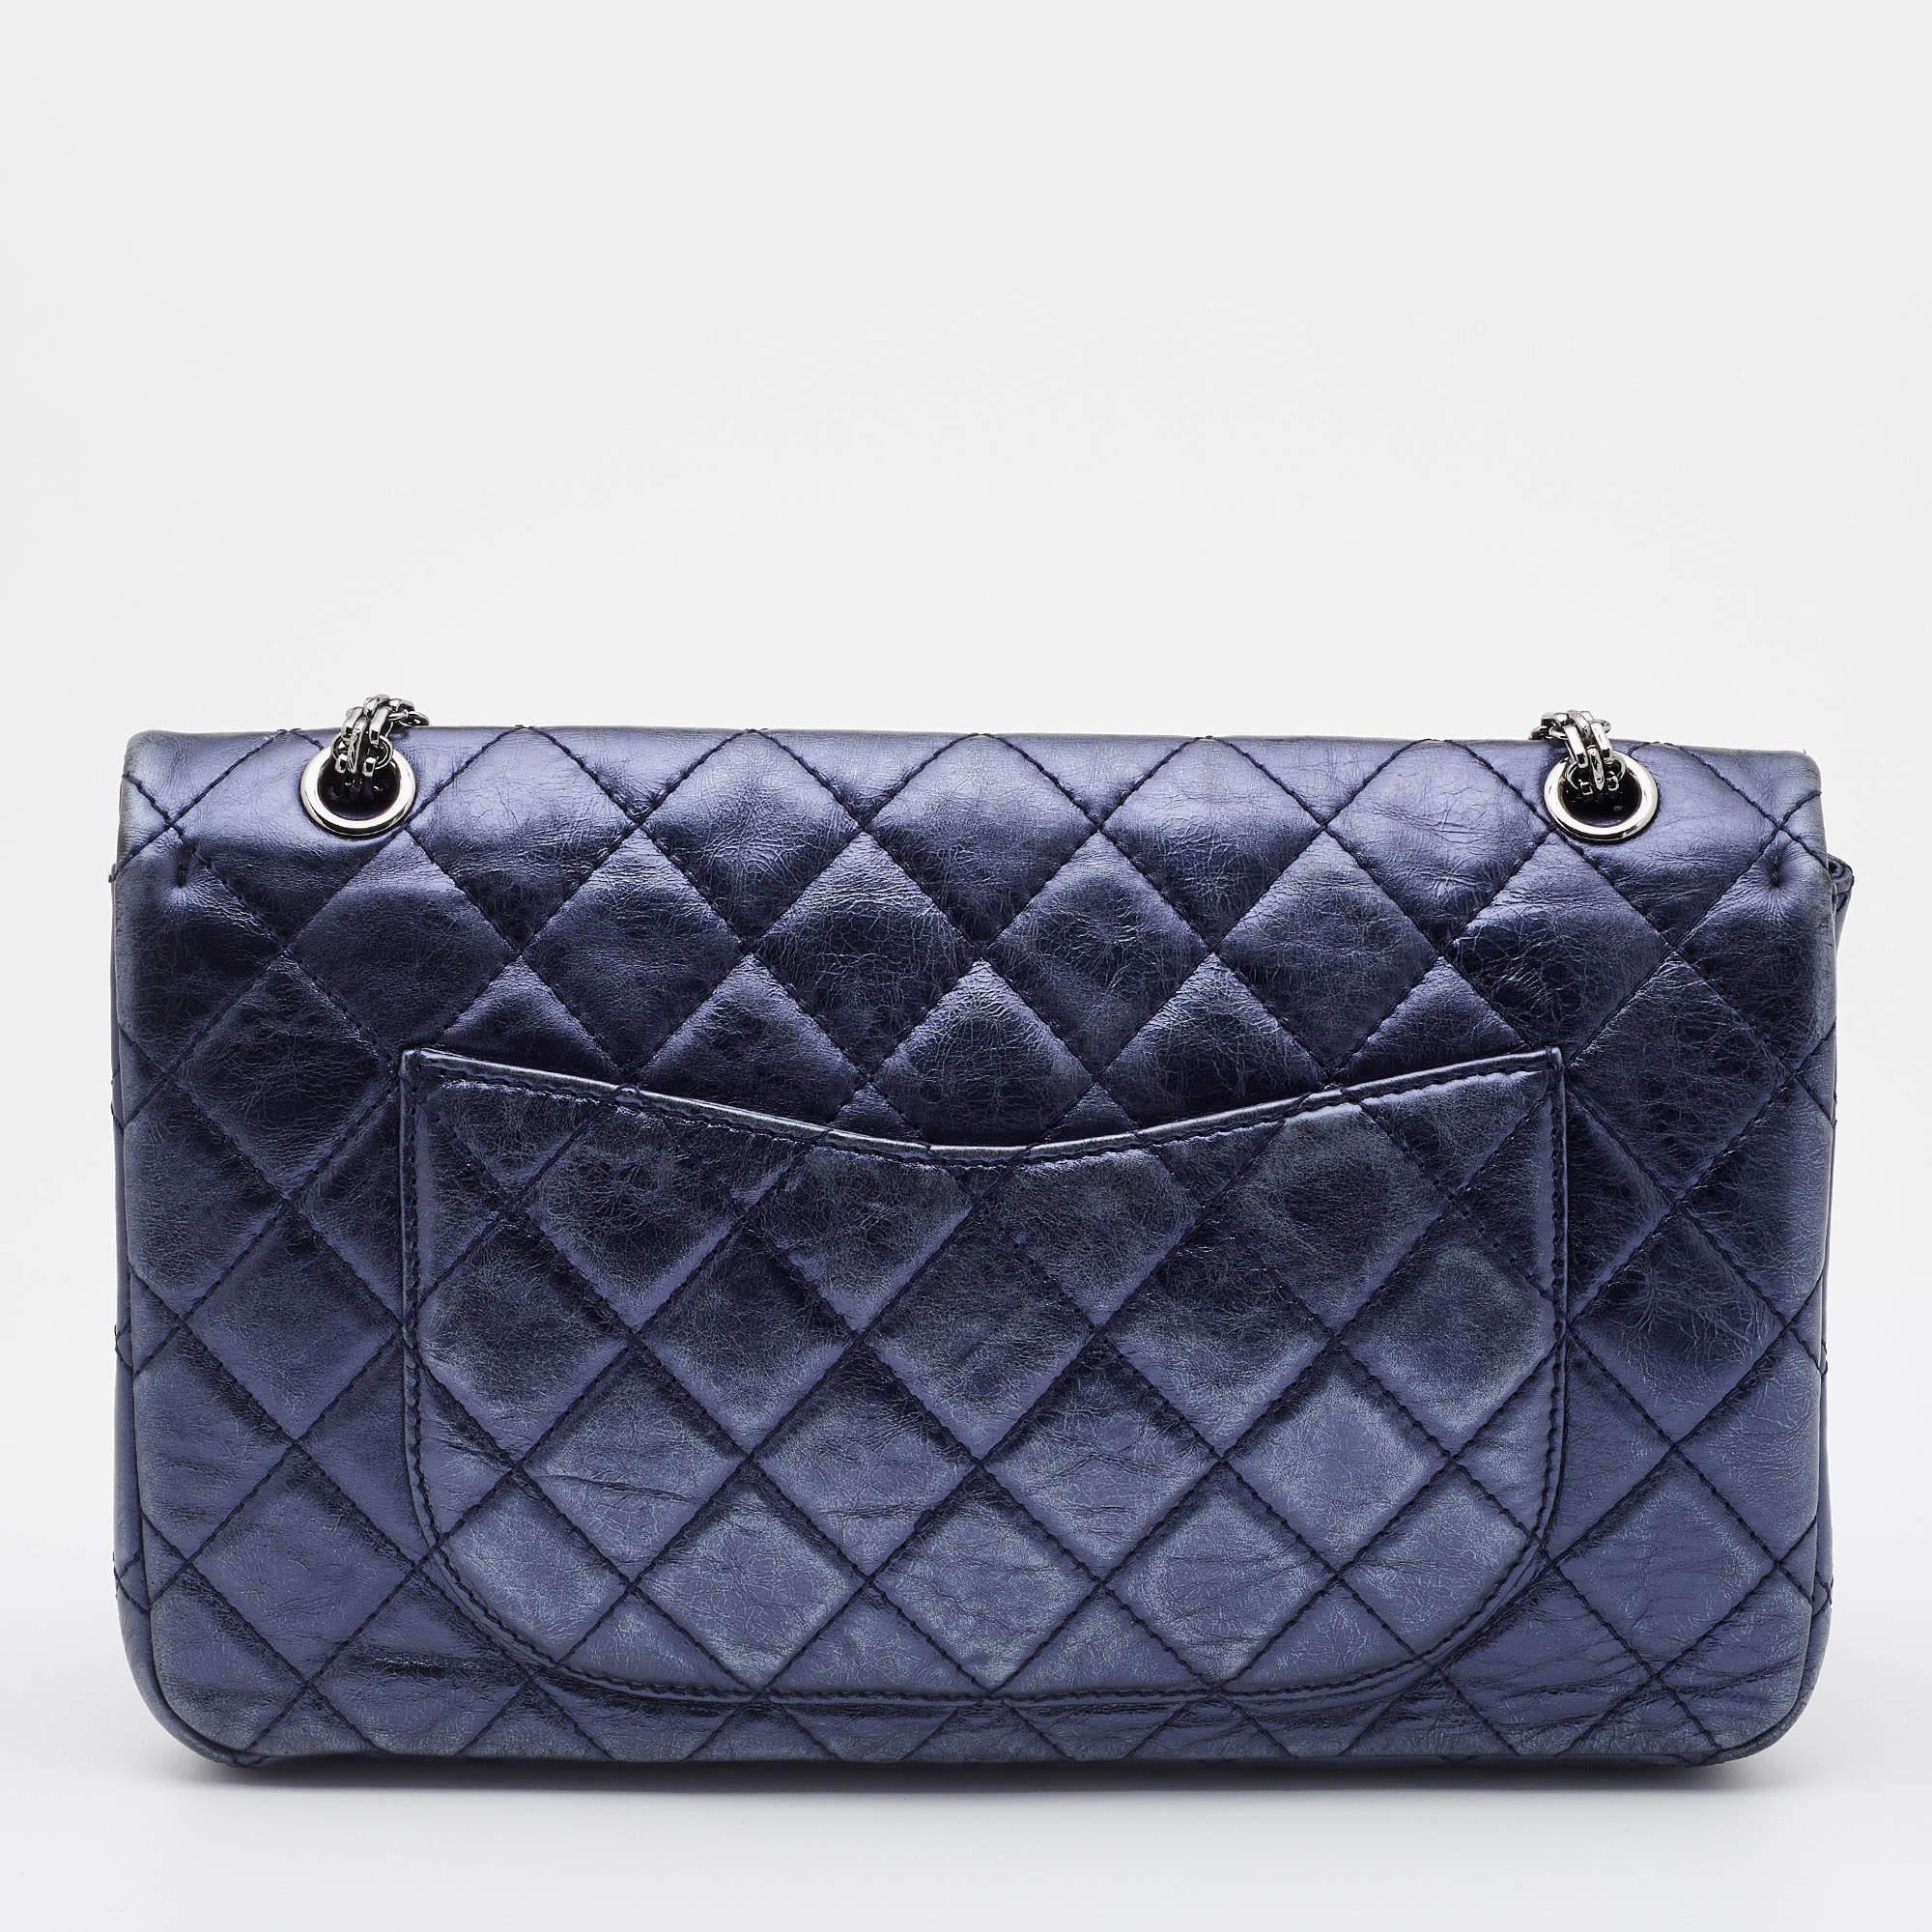 Introduce Chanel's irreplaceable style to your closet with this Reissue 2.55 Classic 227 Flap bag. Crafted using blue leather, the bag has a signature quilted exterior, the Mademoiselle lock on the front, and a leather-lined interior. Complete with